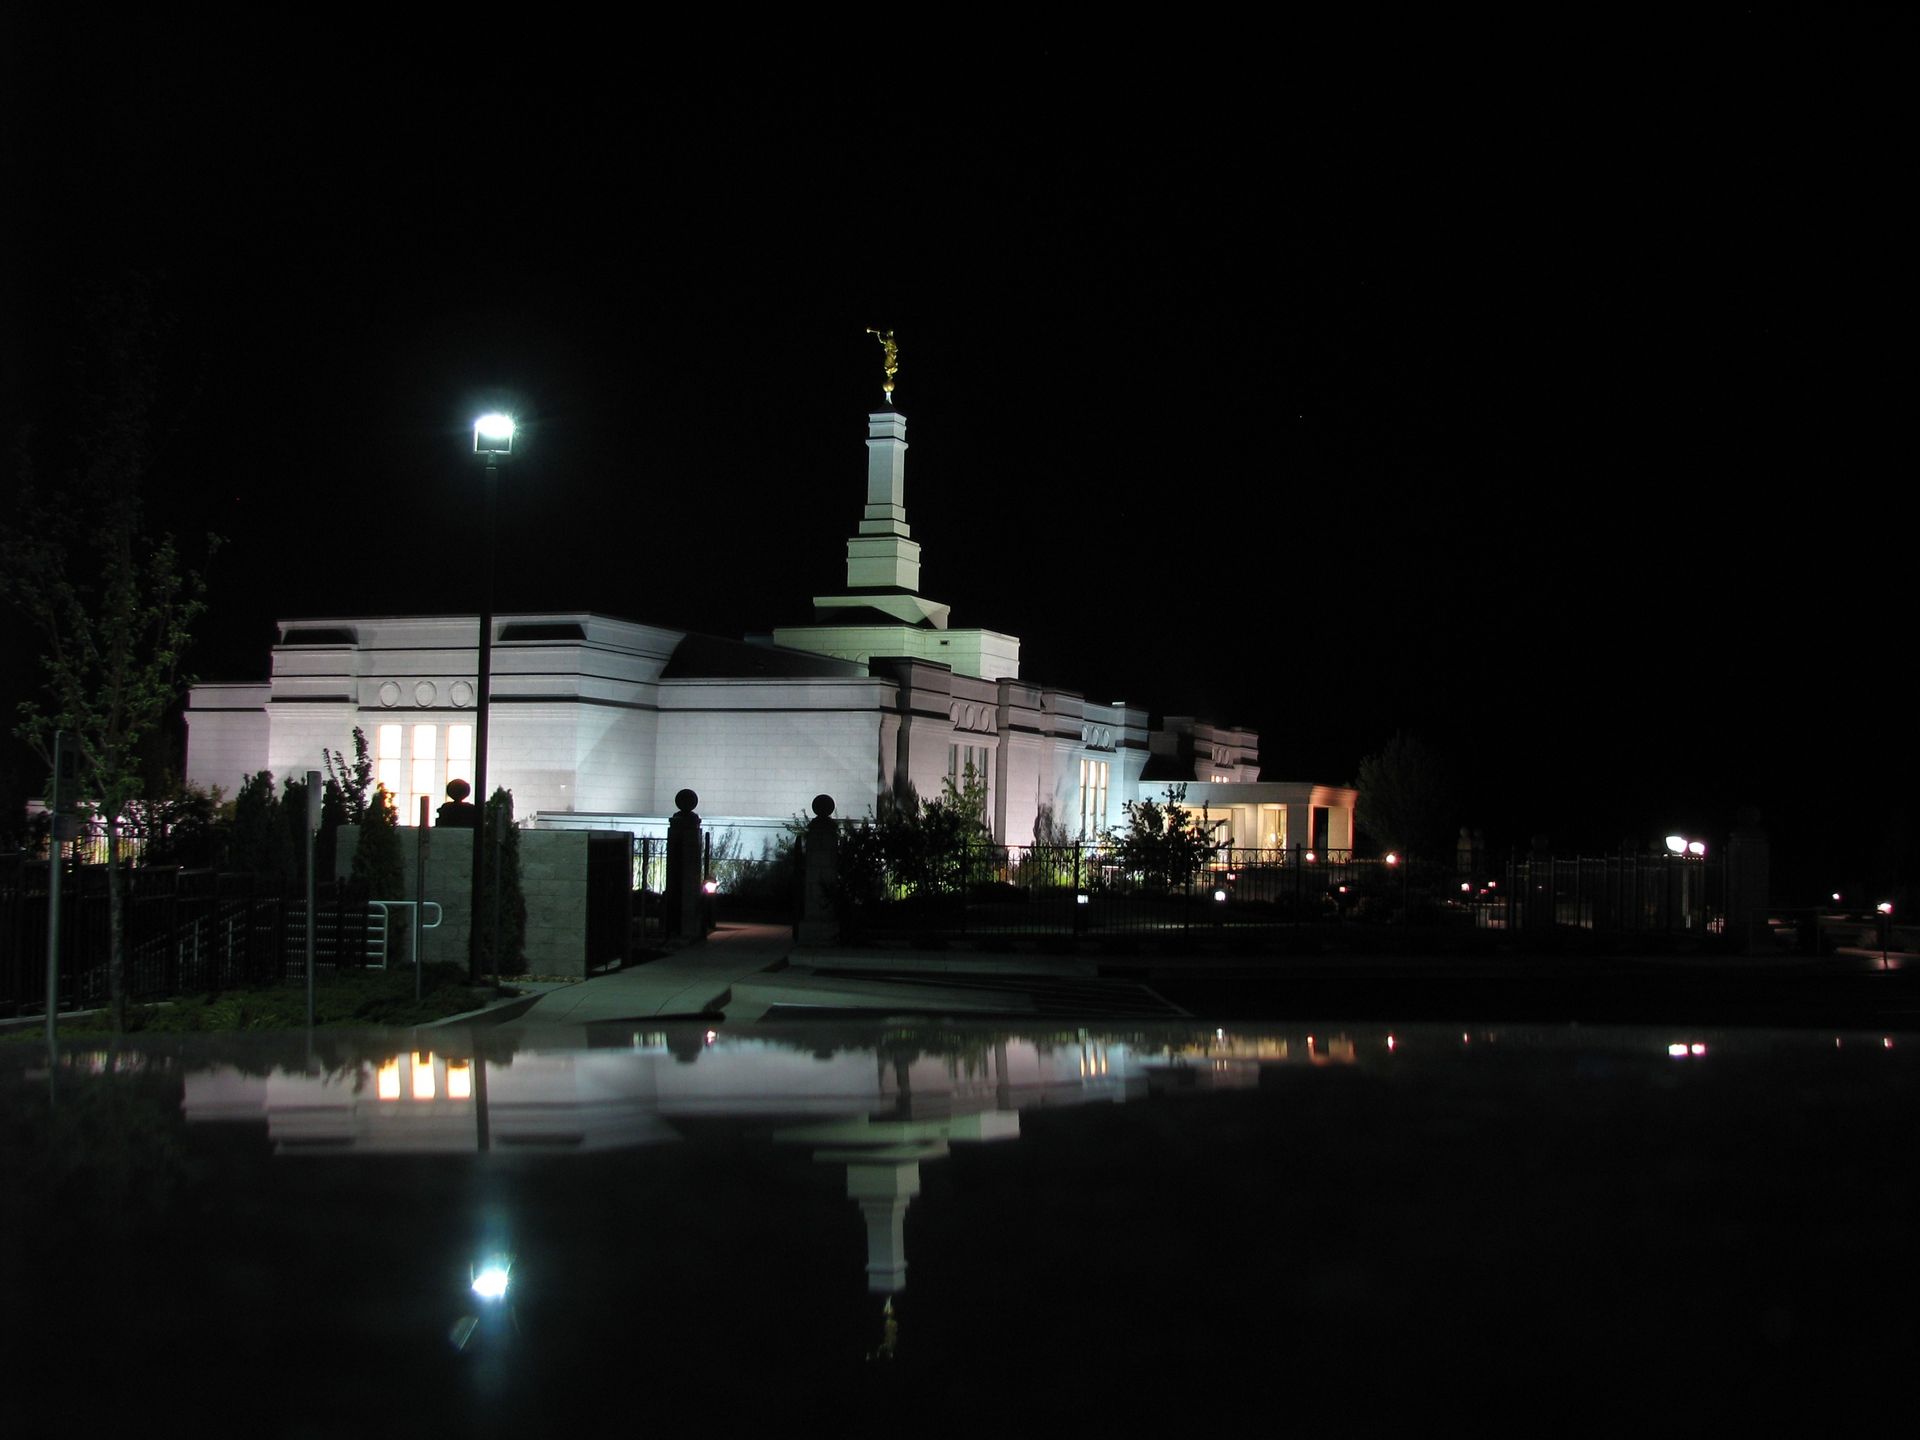 The Reno Nevada Temple in the evening, including the grounds.